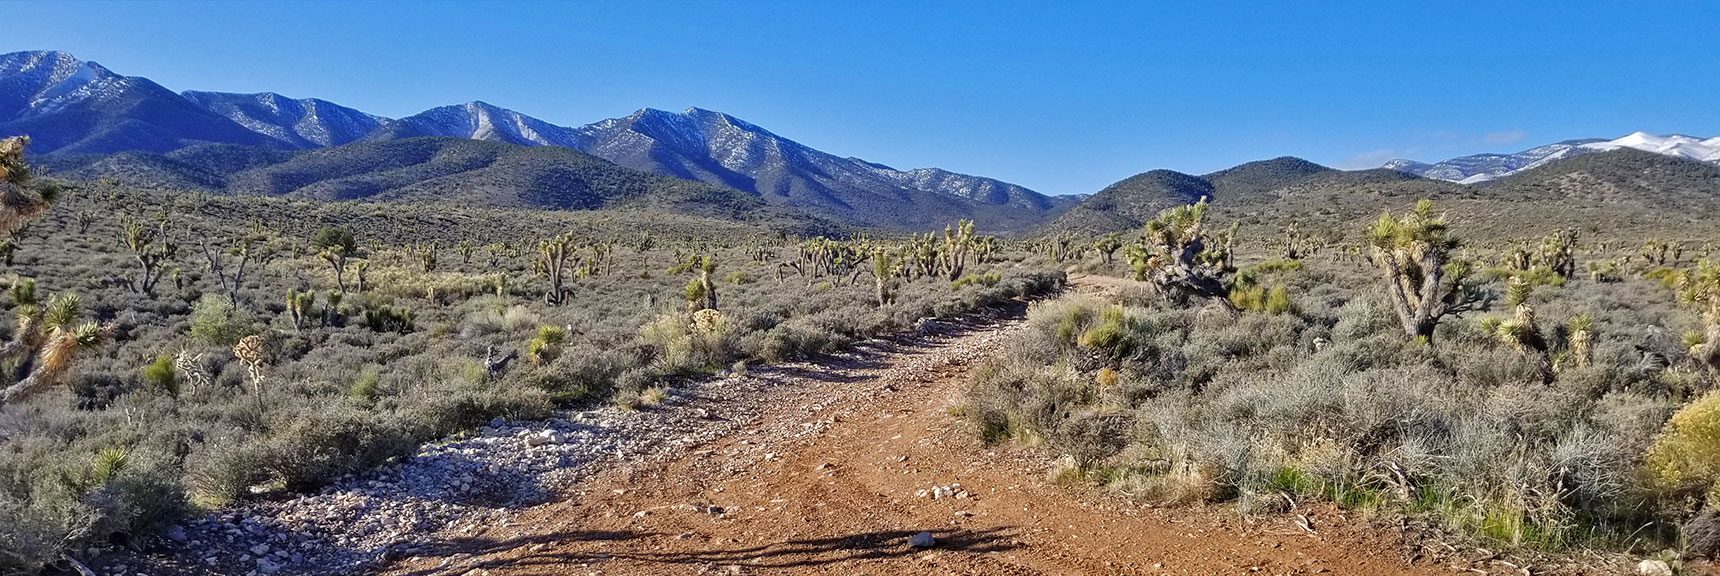 Heading Up 4wd Road Toward North Side of La Madre Mt. Nevada